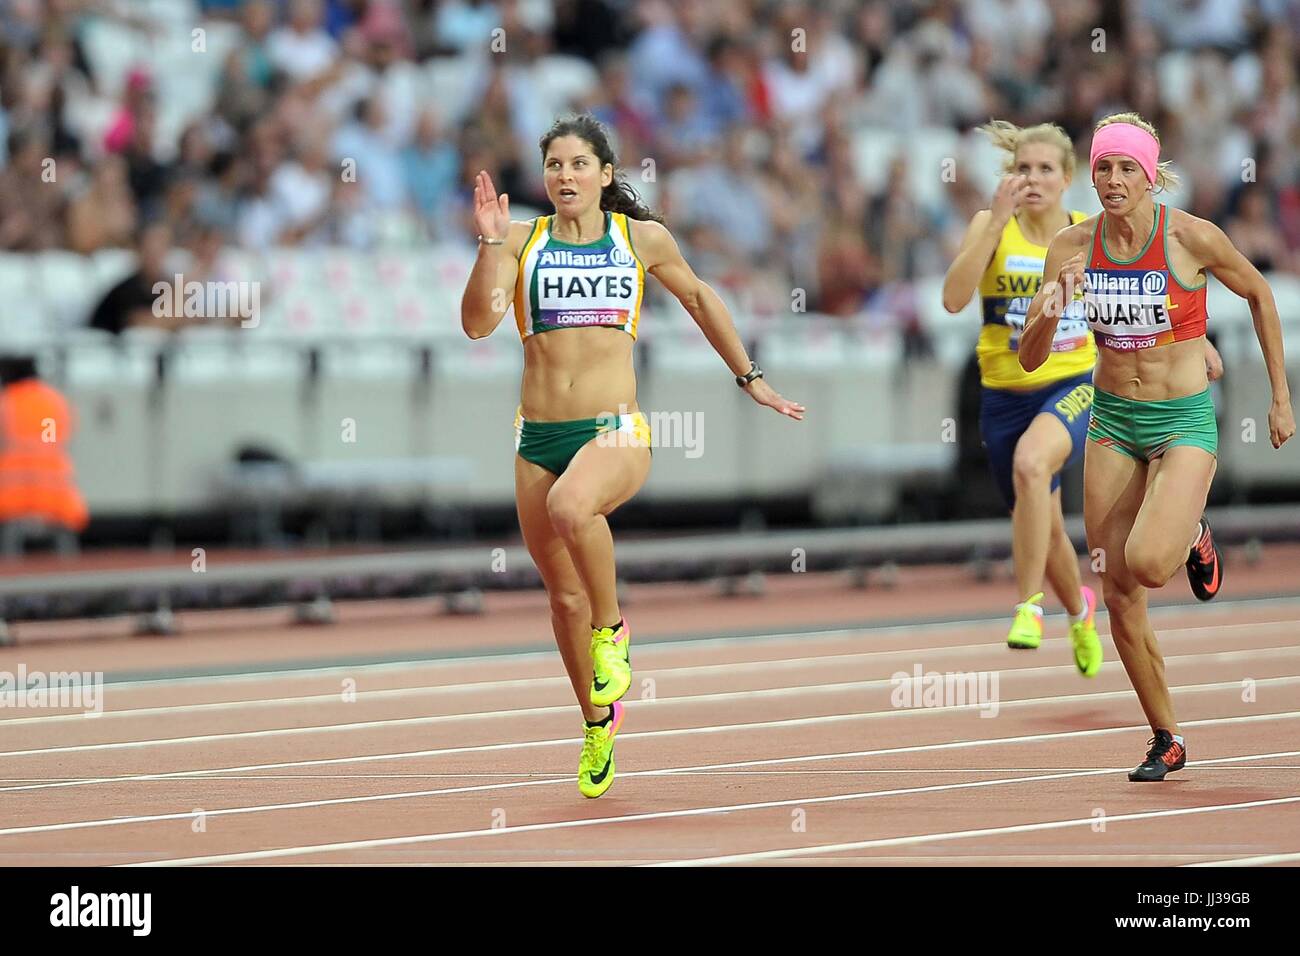 Stratford, UK. 17th Jul, 2017. Lise Hayes (AUS) and Carolina Duarte (POR) in the womens 100m T13. World para athletics championships. London Olympic stadium. Queen Elizabeth Olympic park. Stratford. London. UK. 17/07/2017. Credit: Sport In Pictures/Alamy Live News Stock Photo